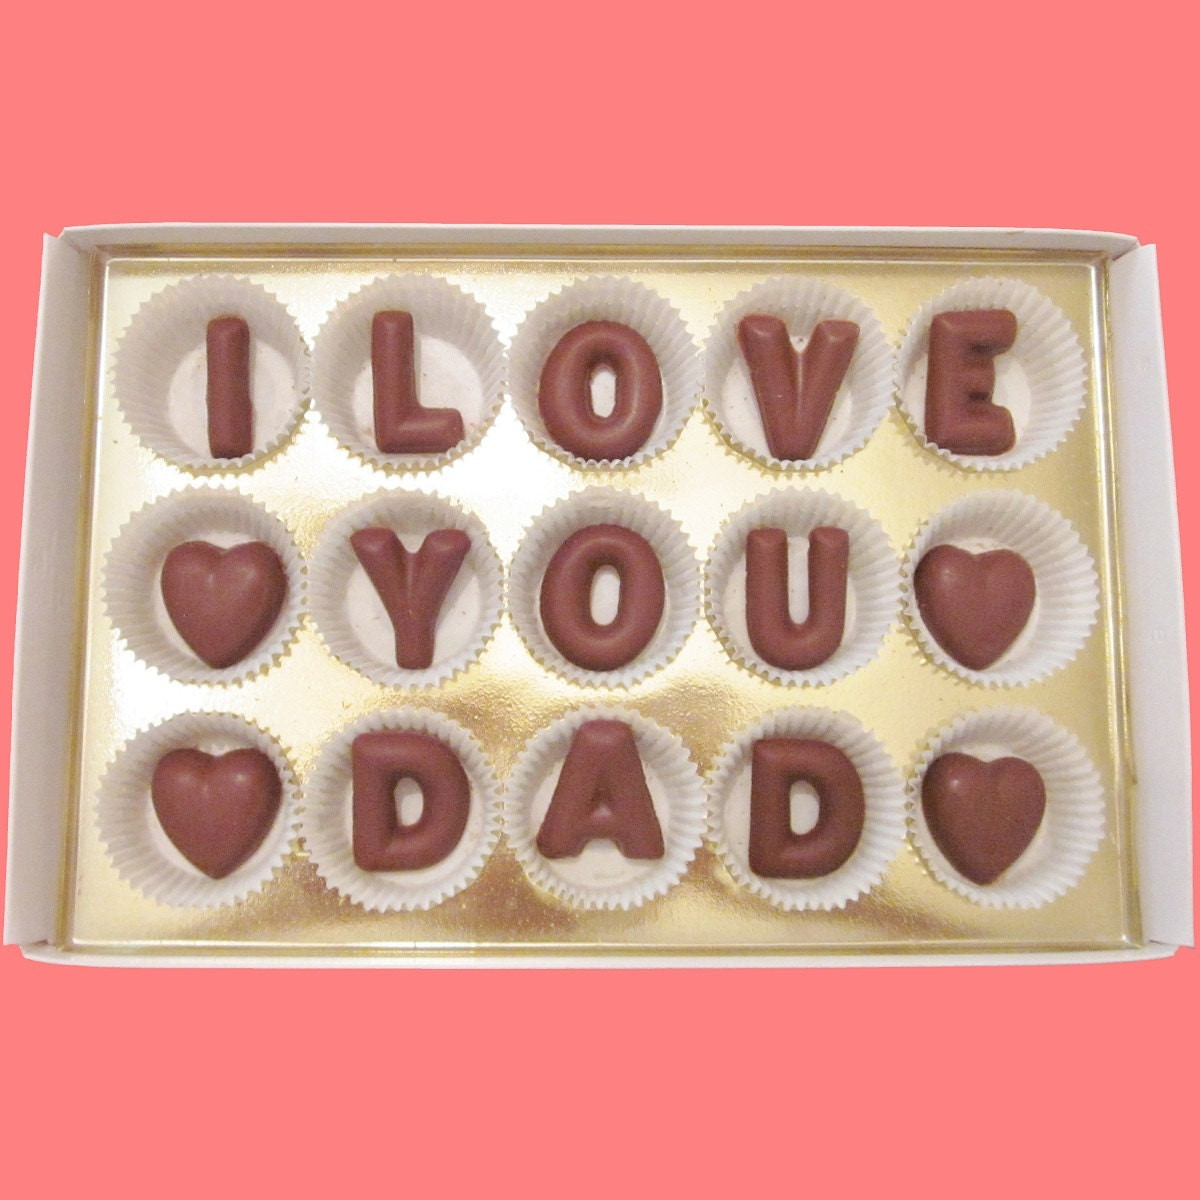 Father Daughter Valentine Gift Ideas
 Valentines Day Gift for Dad from Daughter Fun Gift Idea Gift